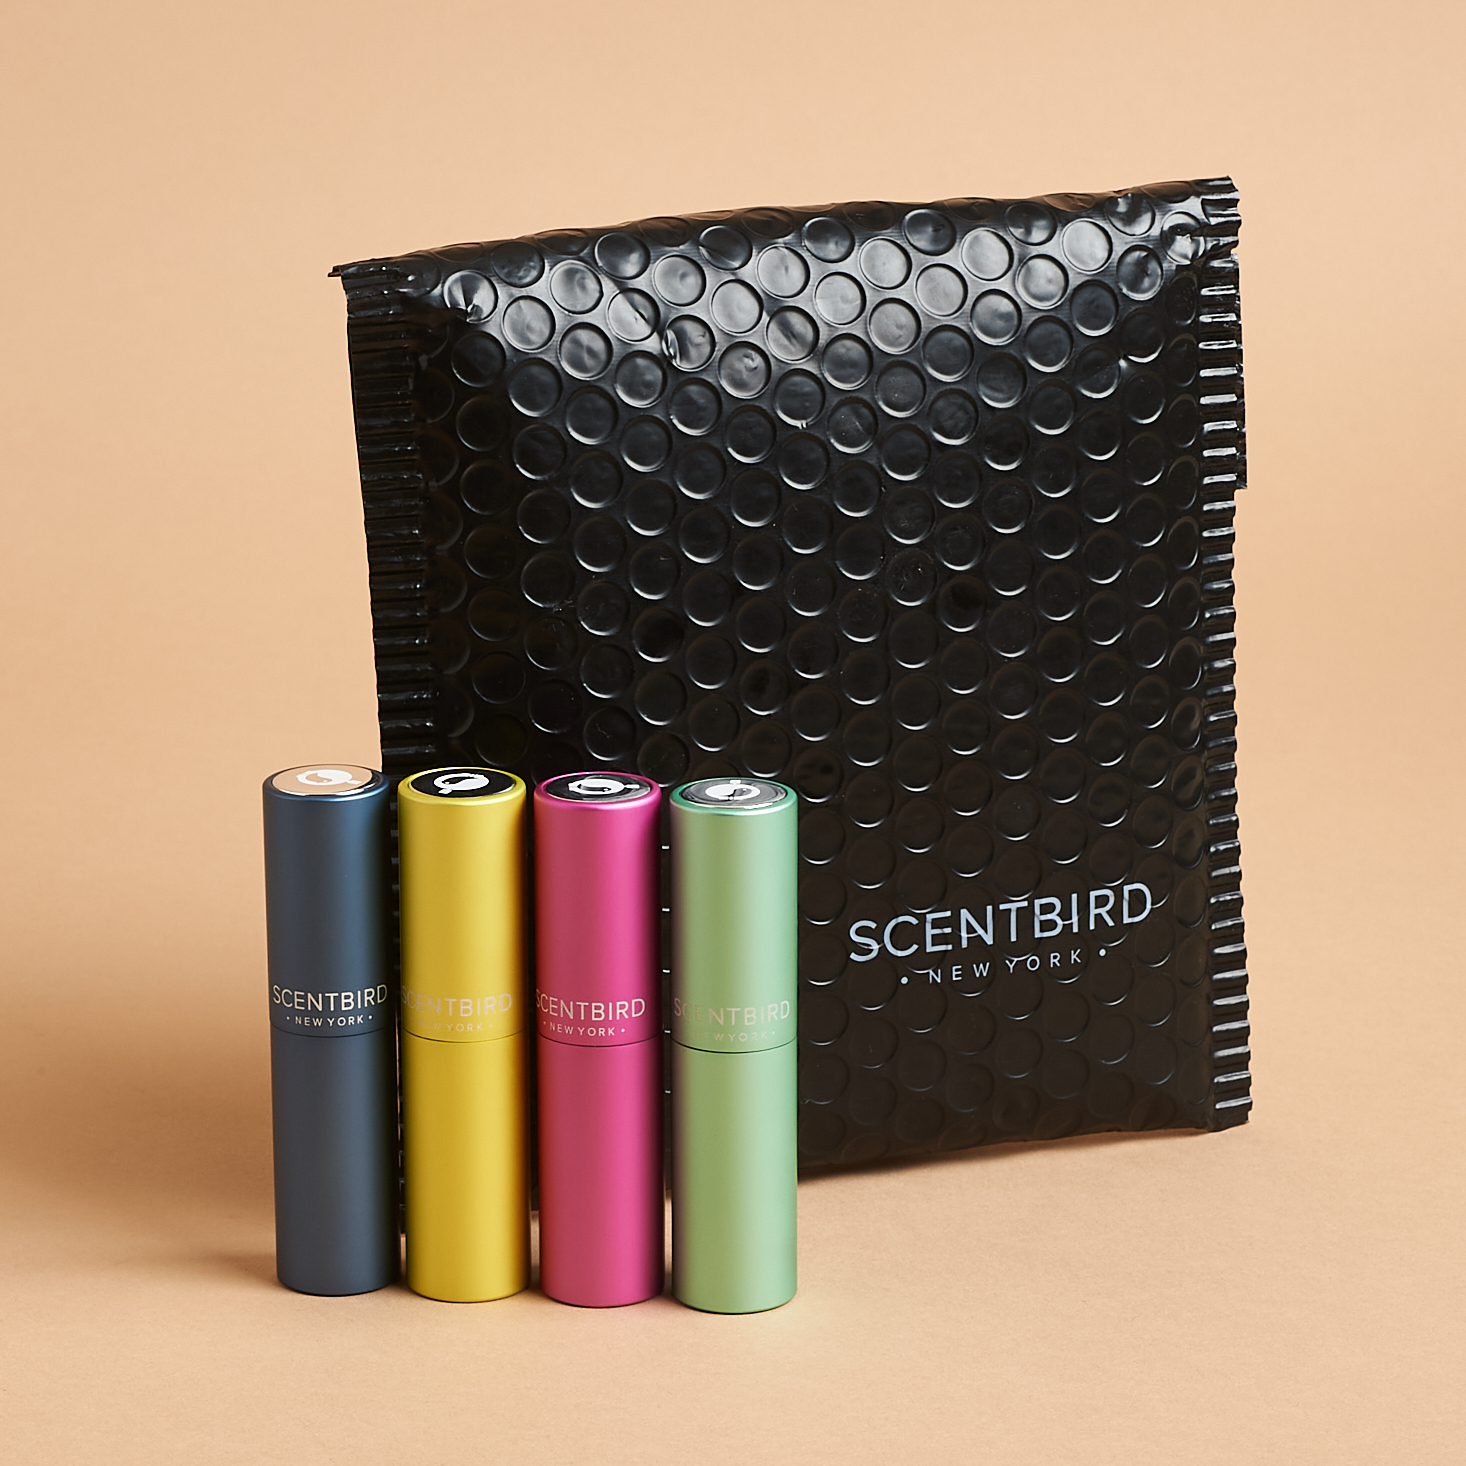 Black Scentbird bubble mailer with four different fragrance cases